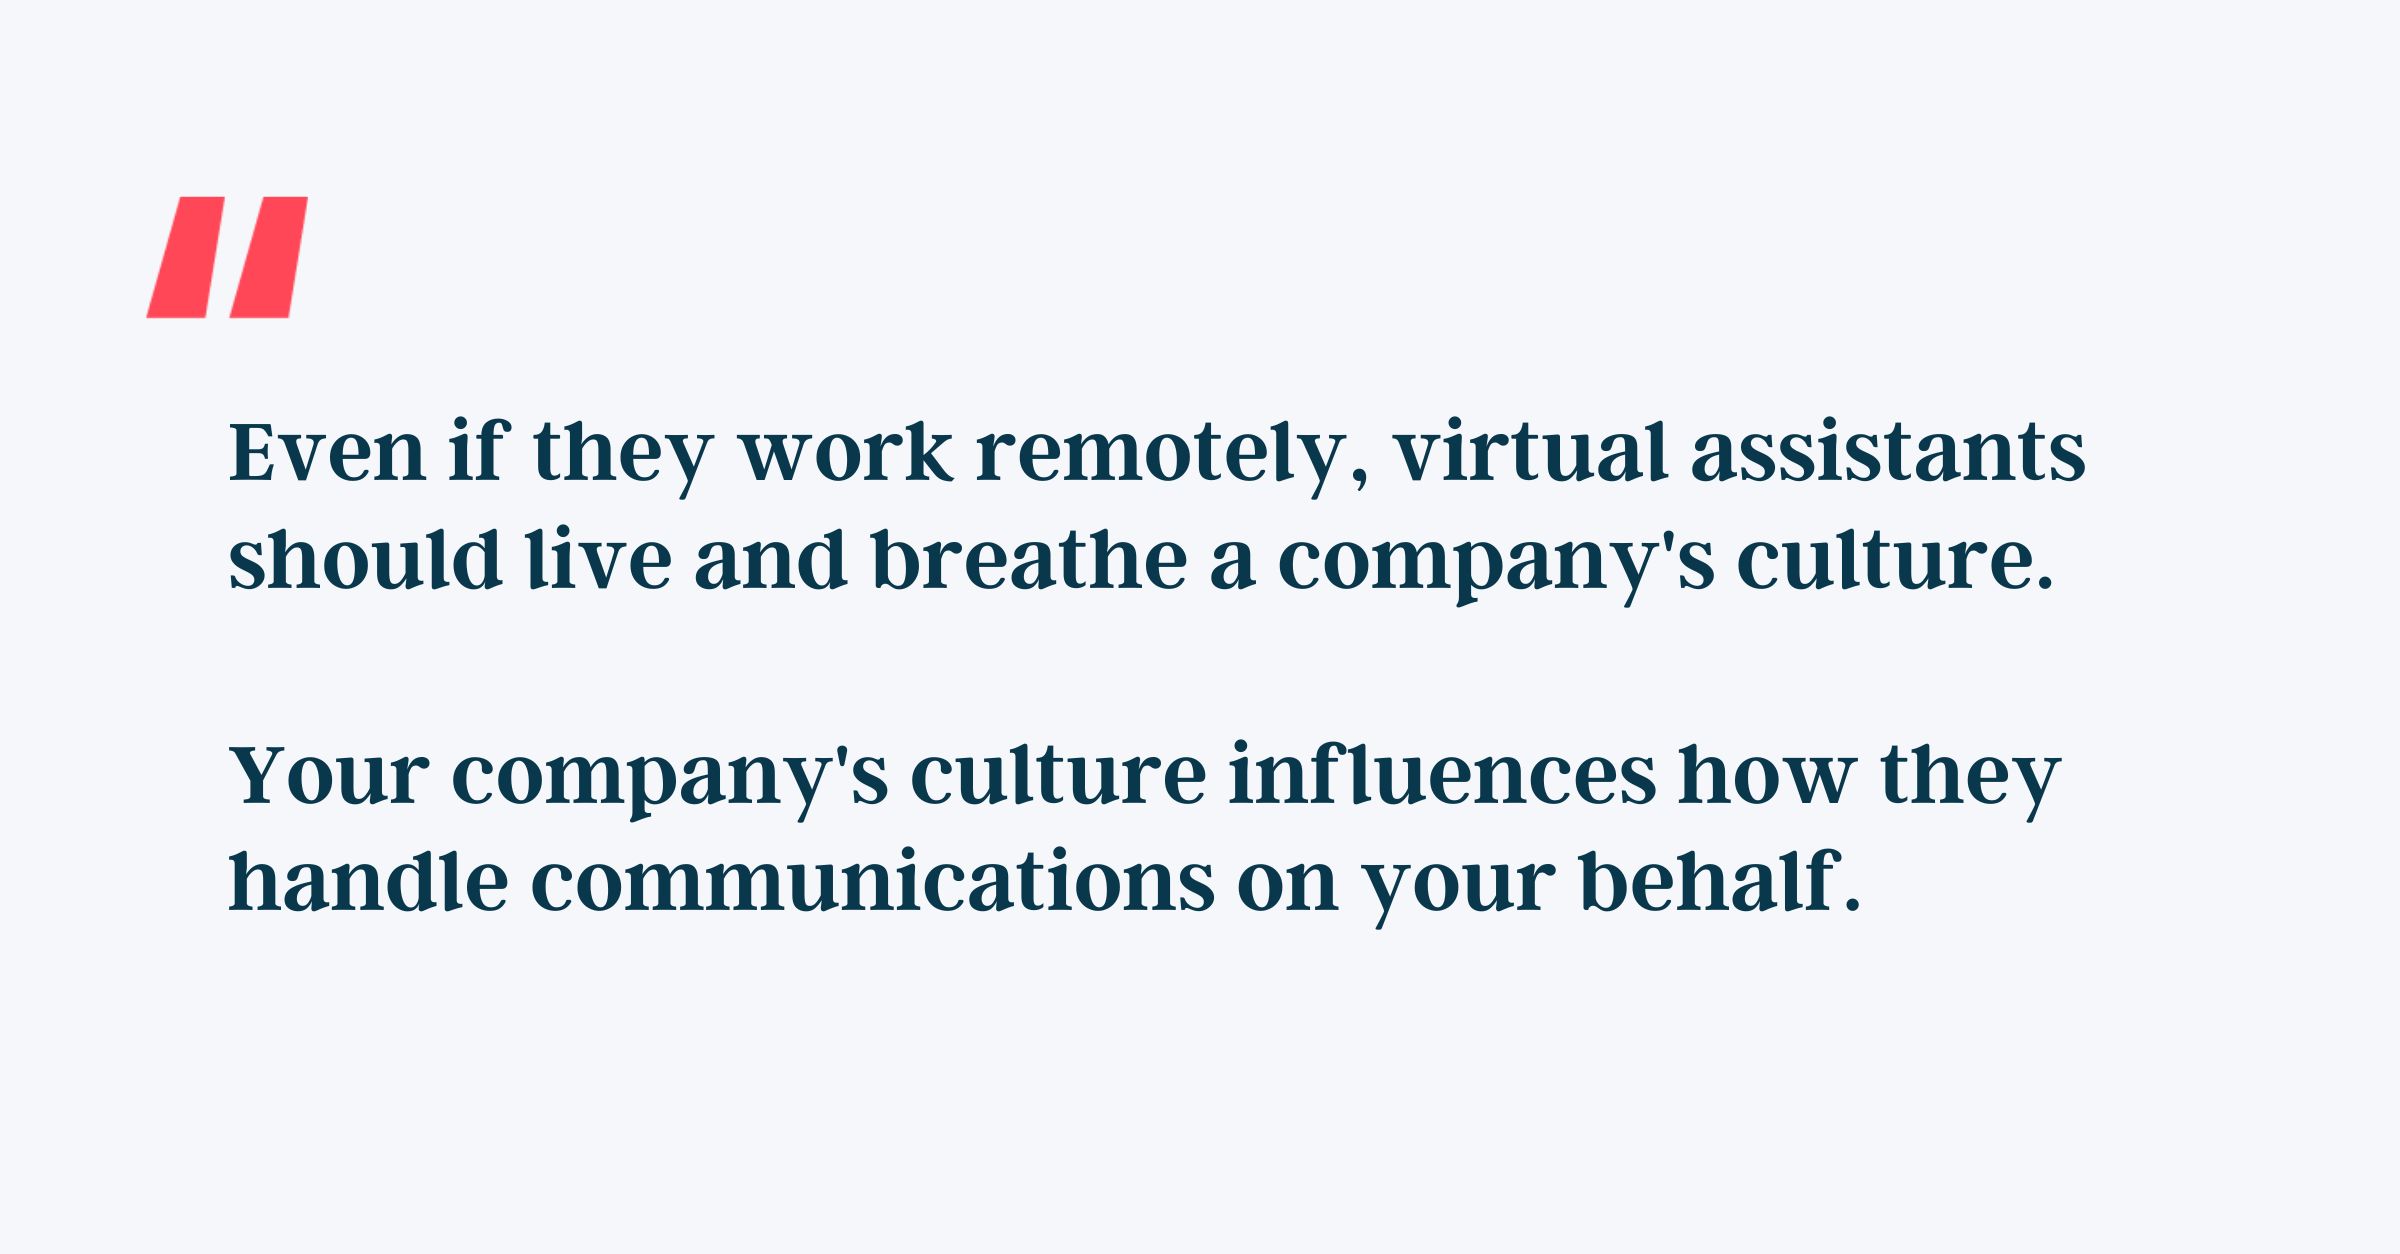 Even if they work remotely, virtual assistants should live and breathe a company's culture. 

Your company's culture influences how they handle communications on your behalf.